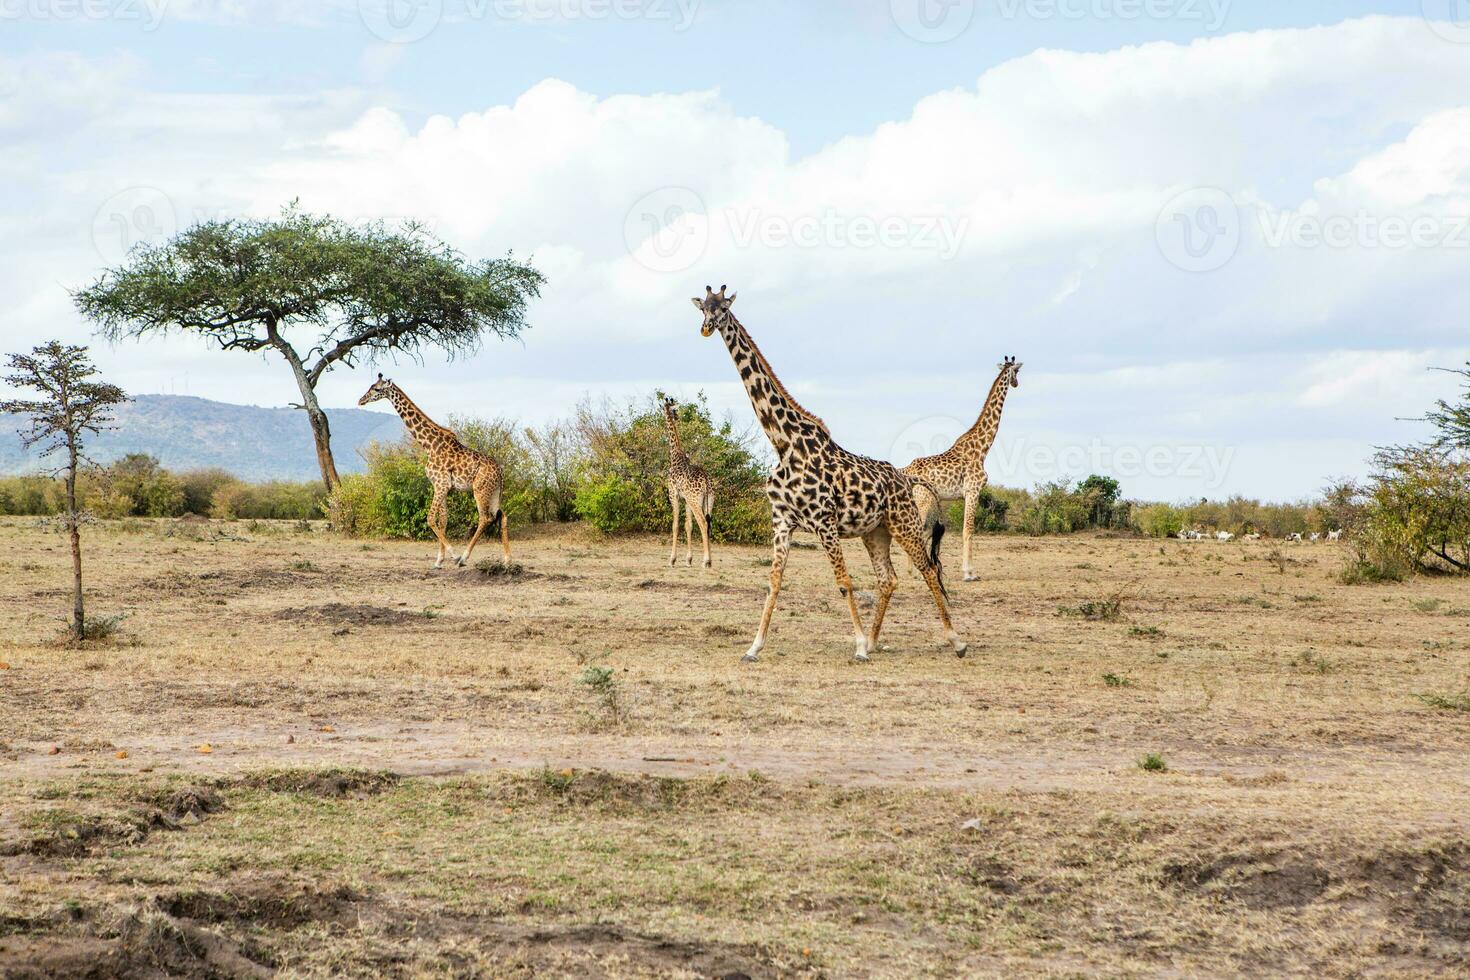 Safari through the wild world of the Maasai Mara National Park in Kenya. Here you can see antelope, zebra, elephant, lions, giraffes and many other African animals. photo